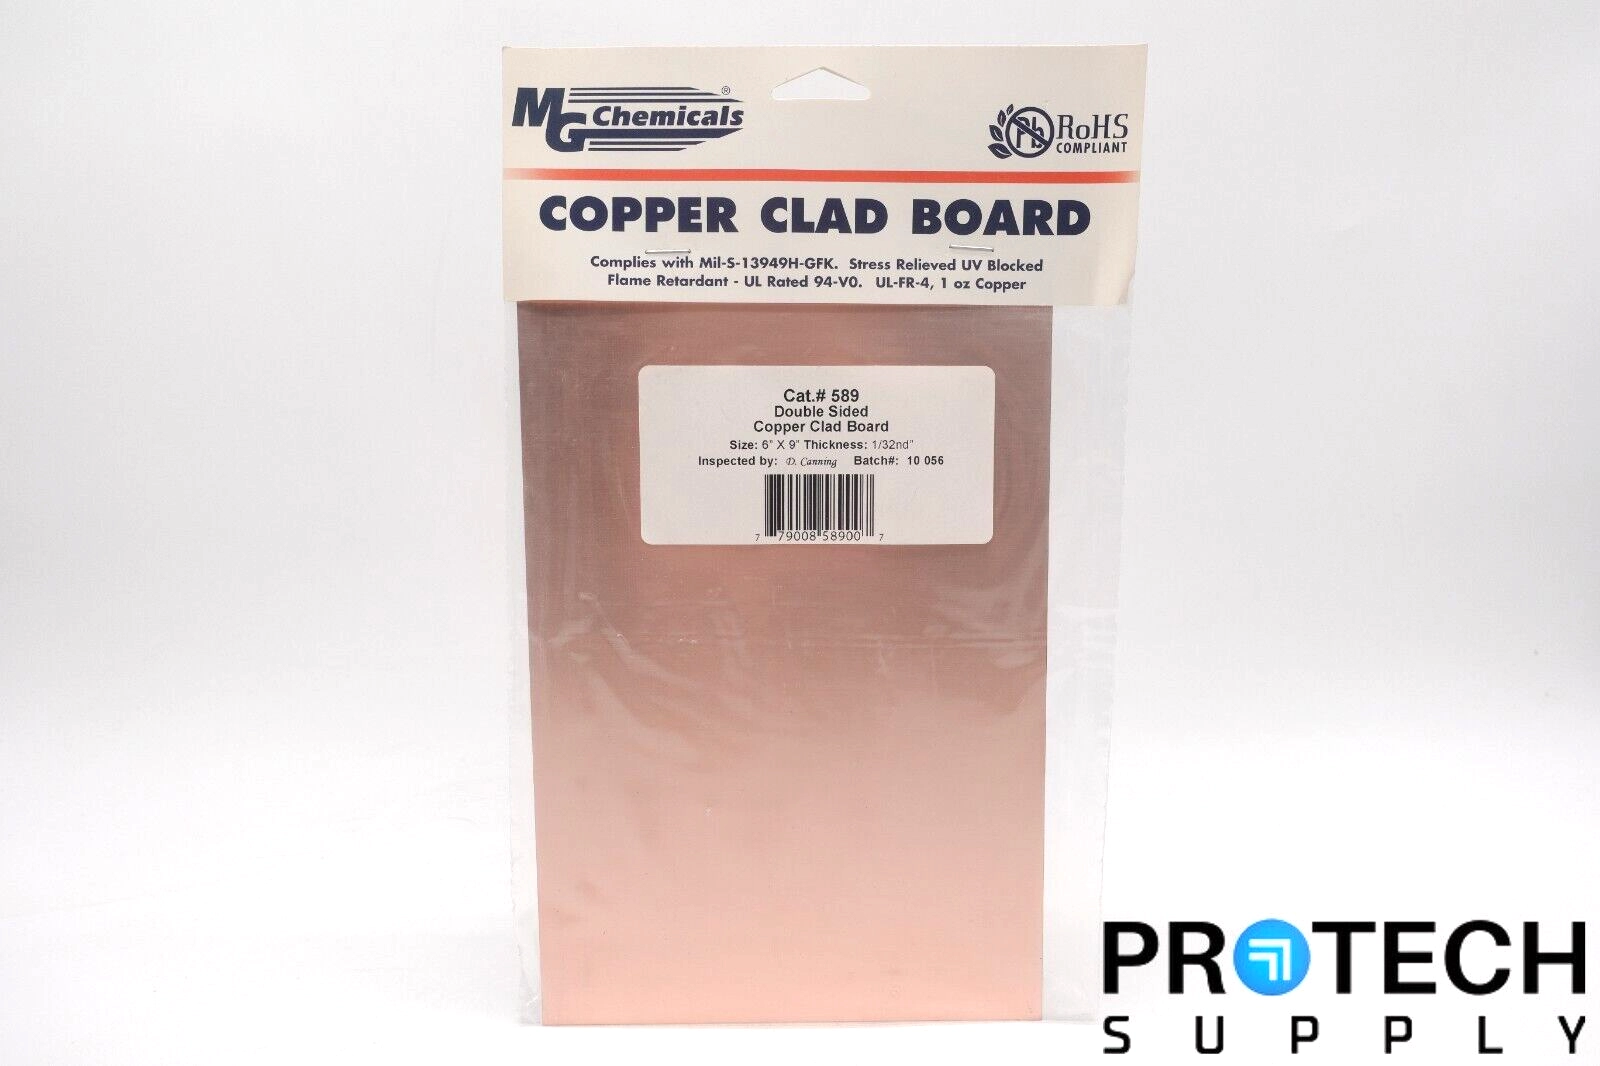 MG Chemicals 589 Double Sided 9" x 6" Copper Clad 